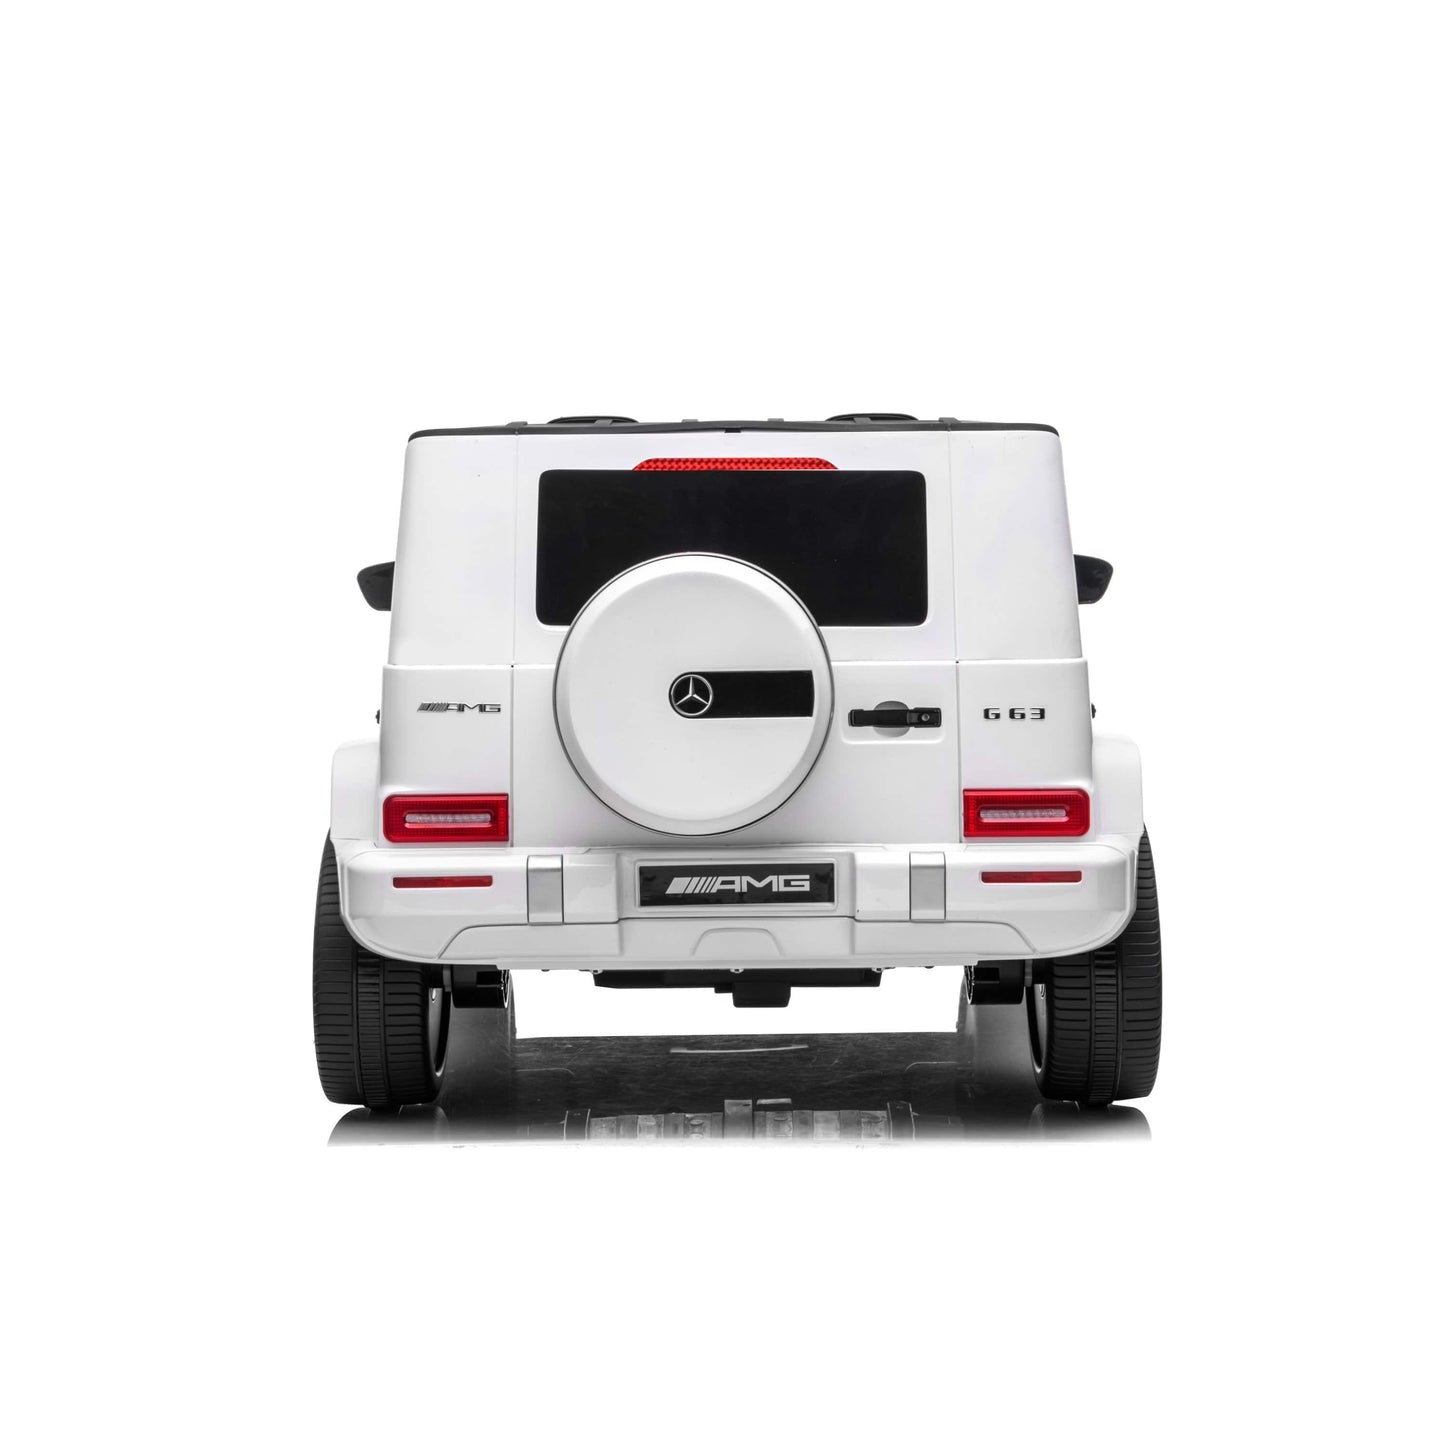 24V 4x4 Mercedes G63 2 Seater Ride on Car with Parental Remote Control (White)